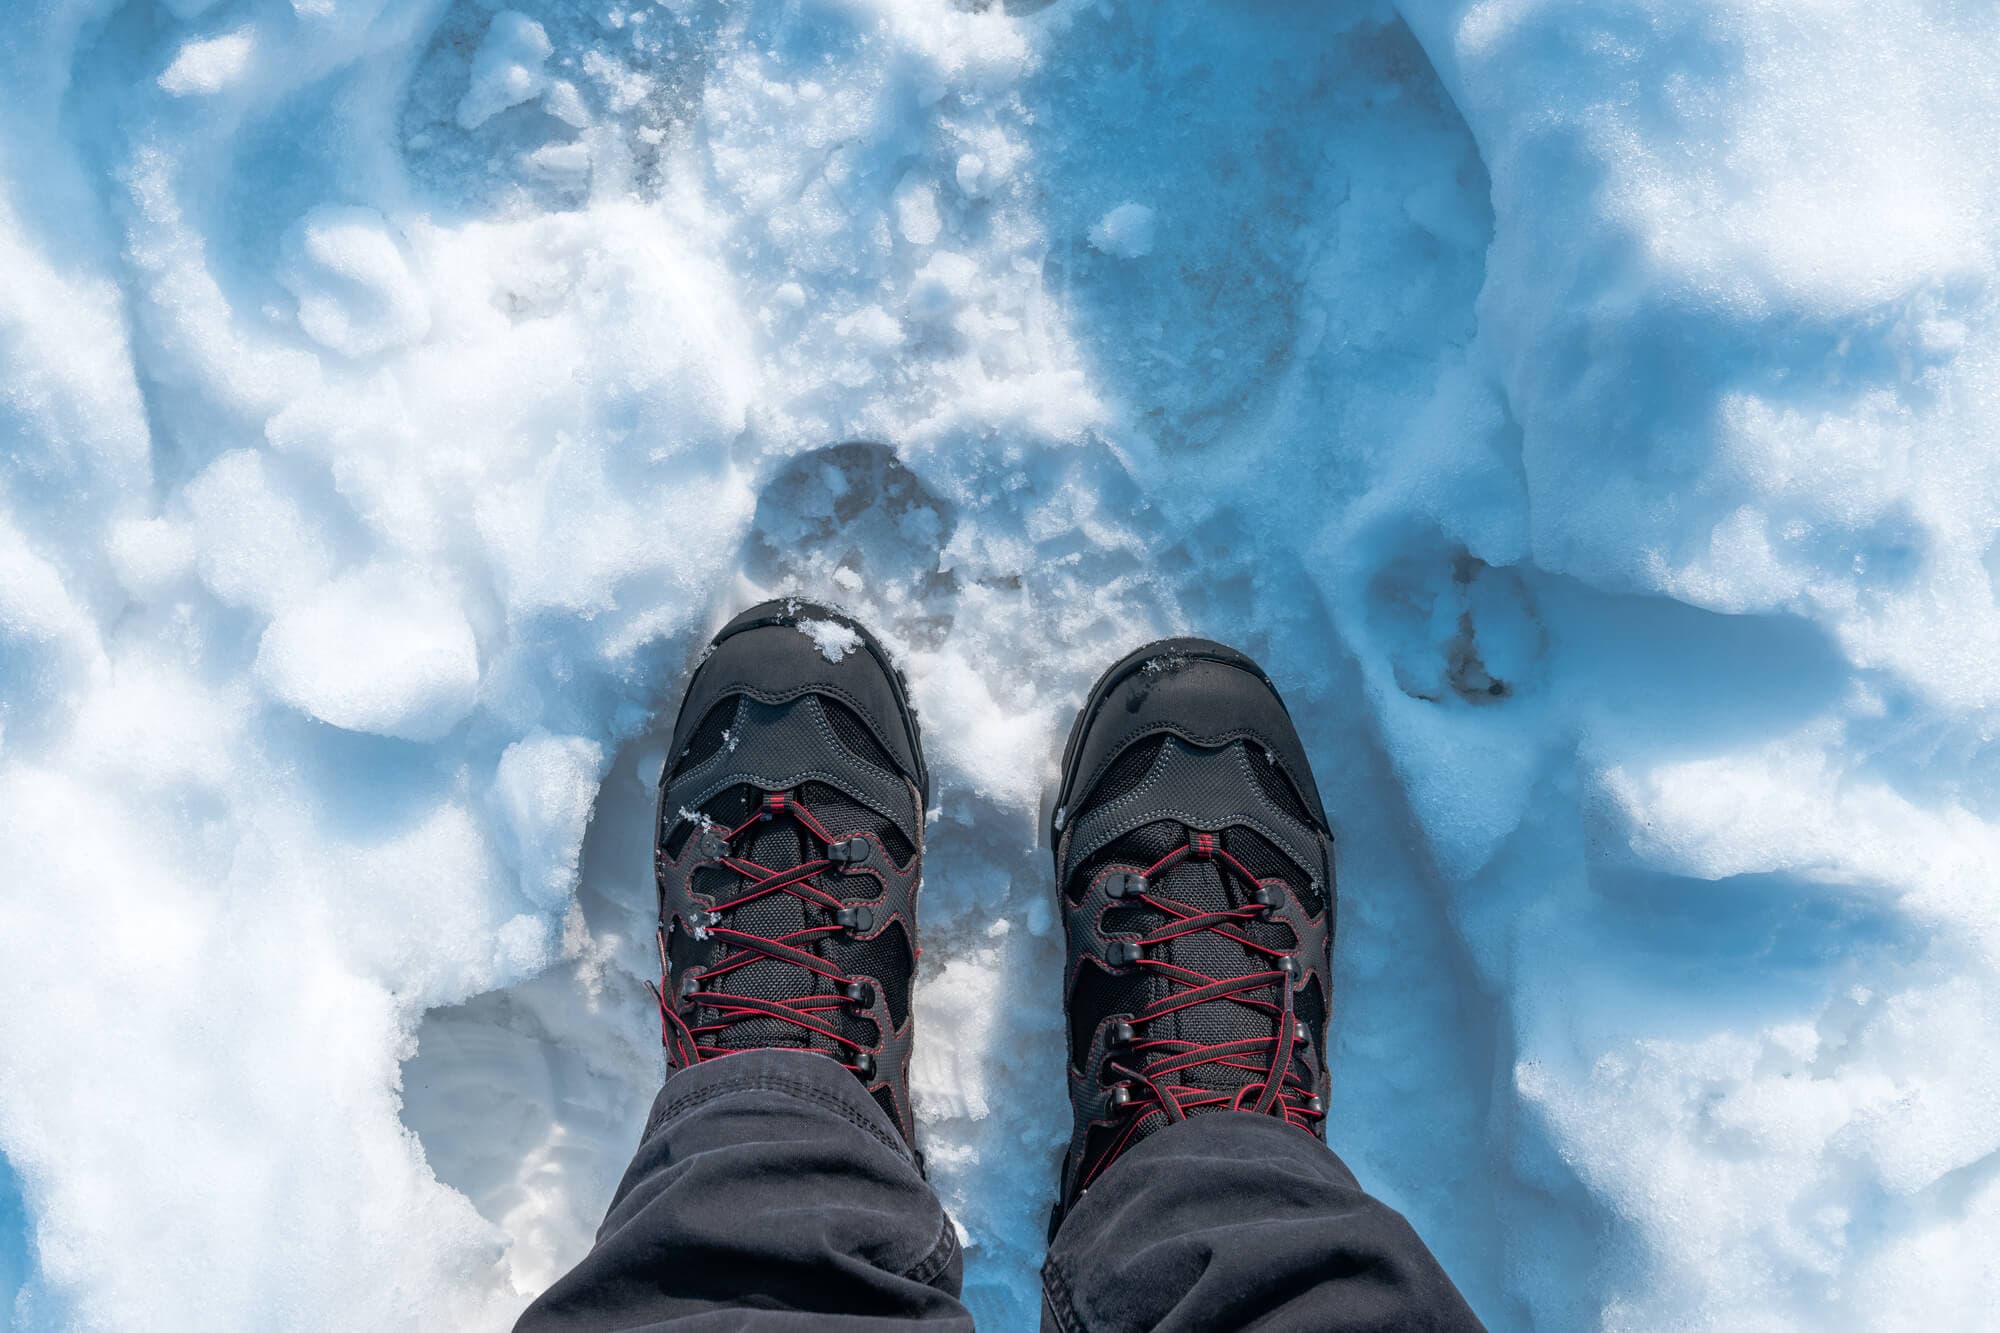 Best Snowmobile Boots: Our Top Picks for Winter Riding